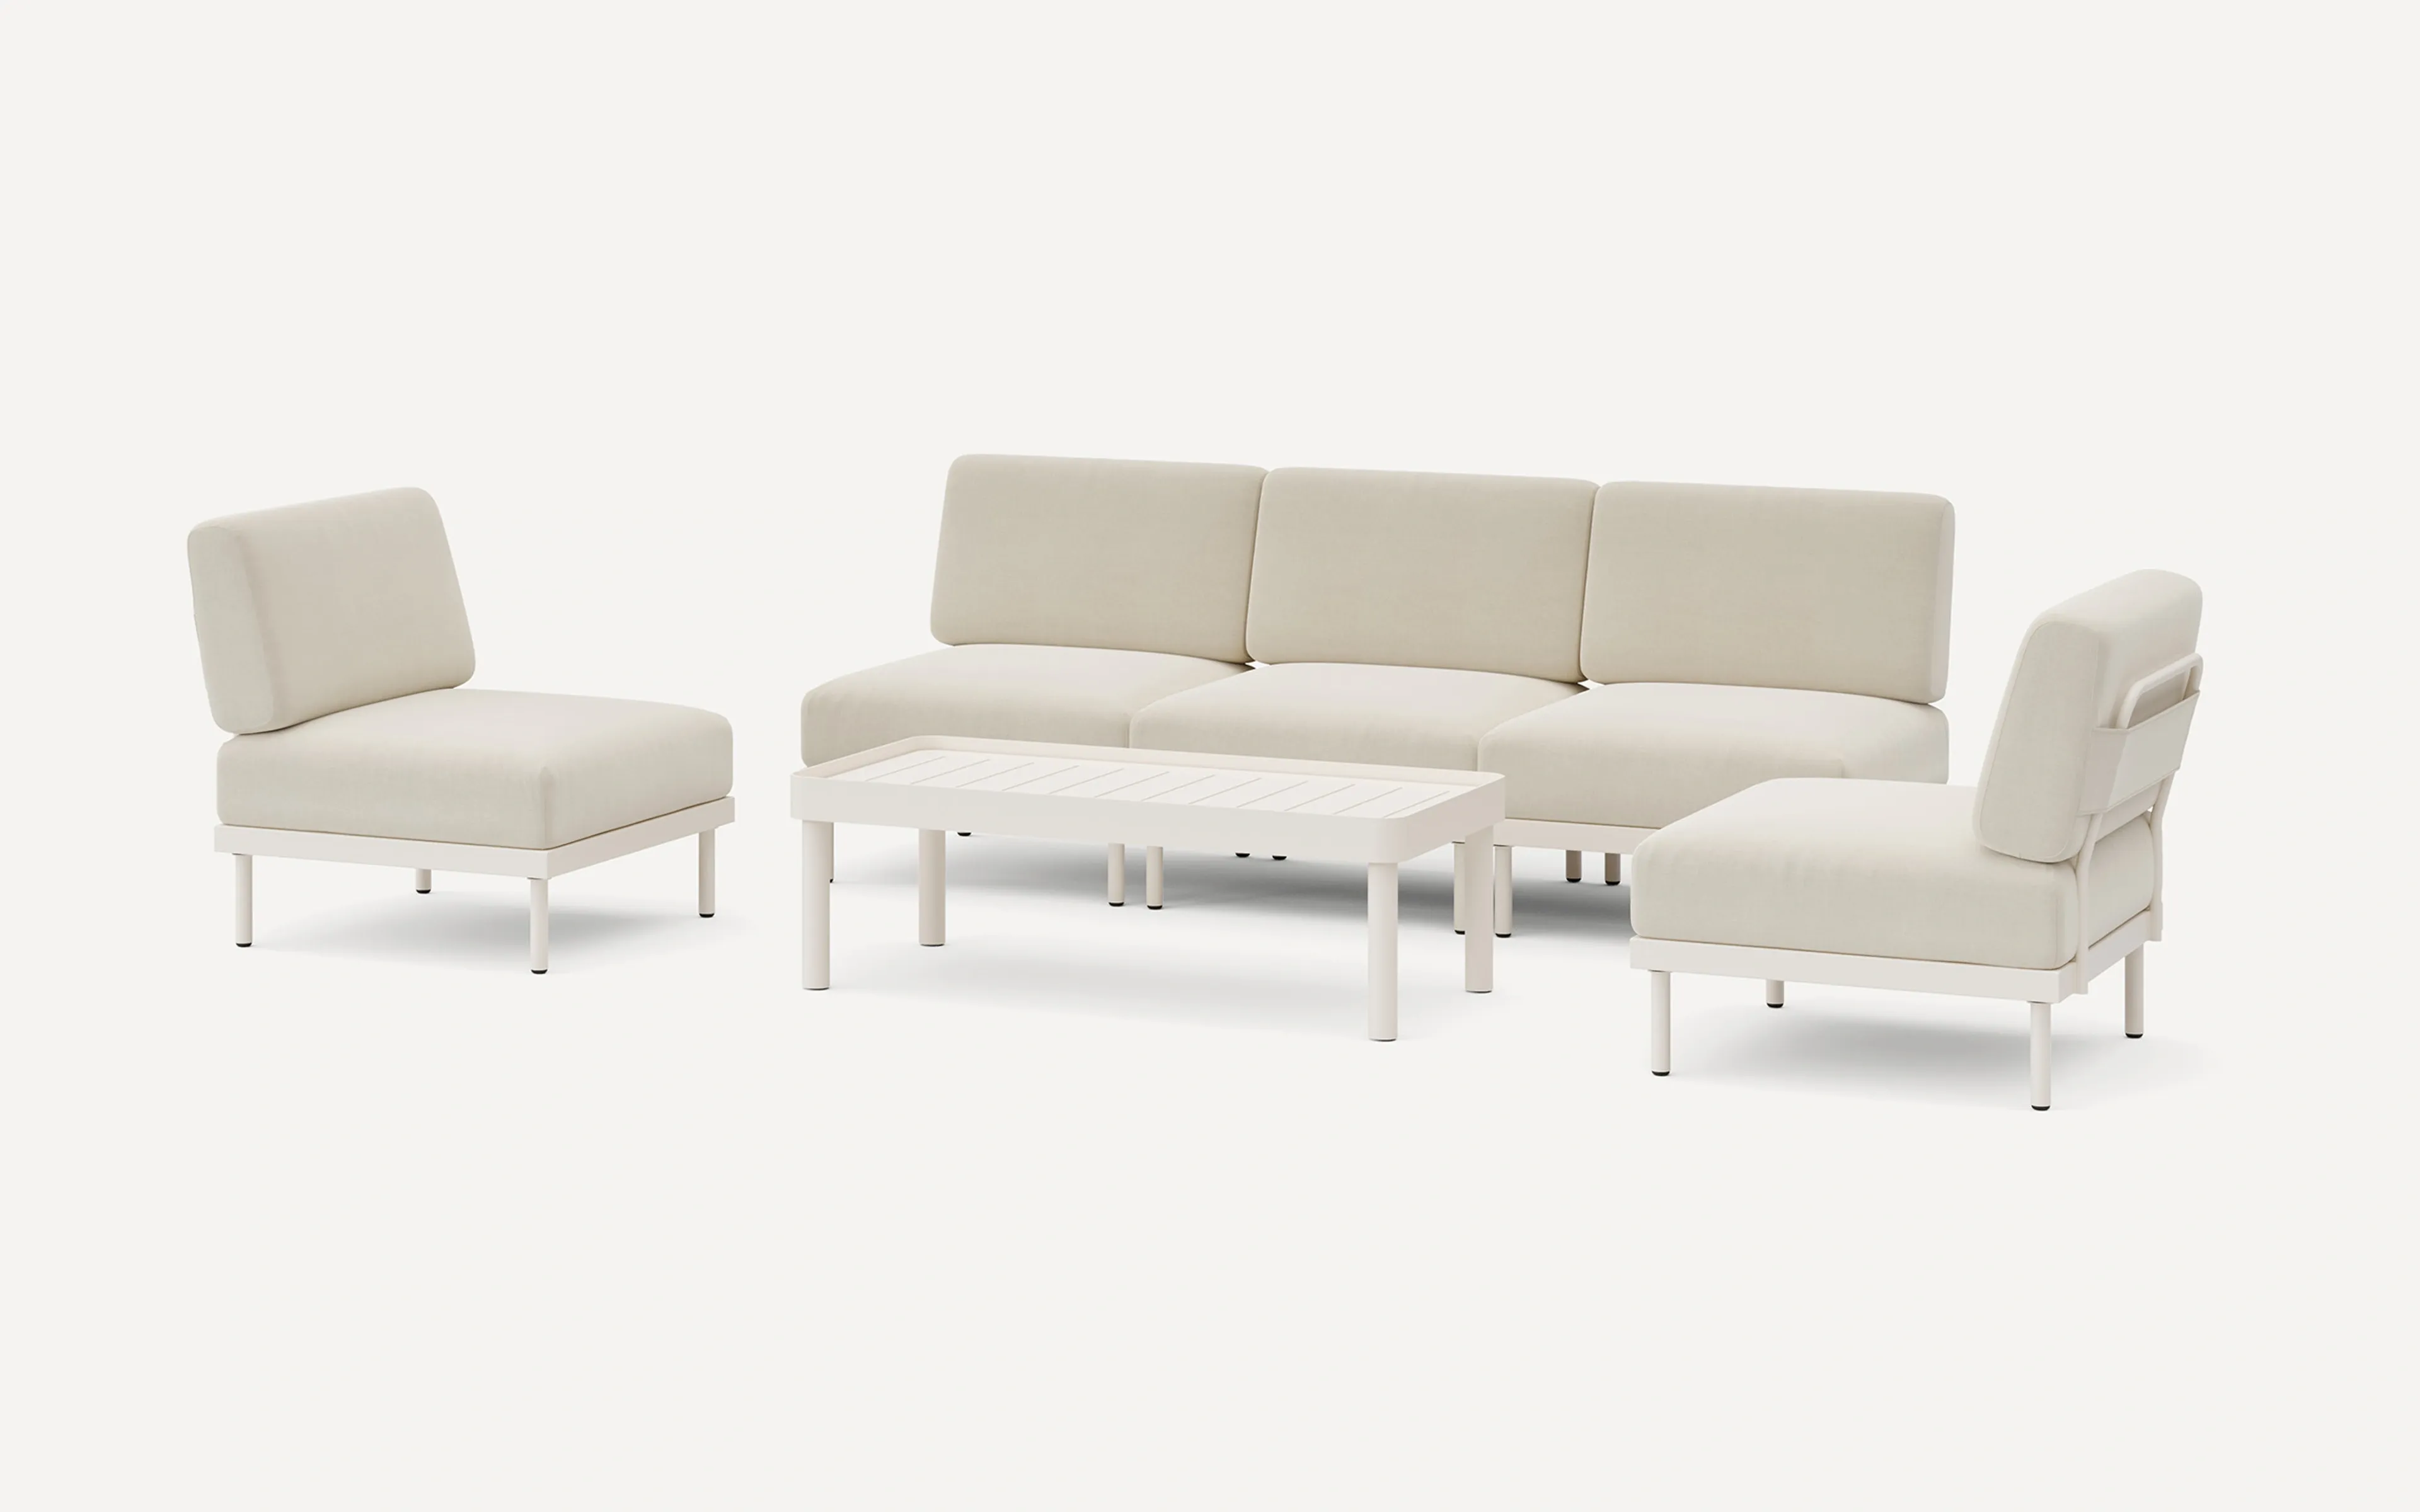 Relay Outdoor 3-Piece Armless Sofa, 2 Chairs, & Coffee Table Set